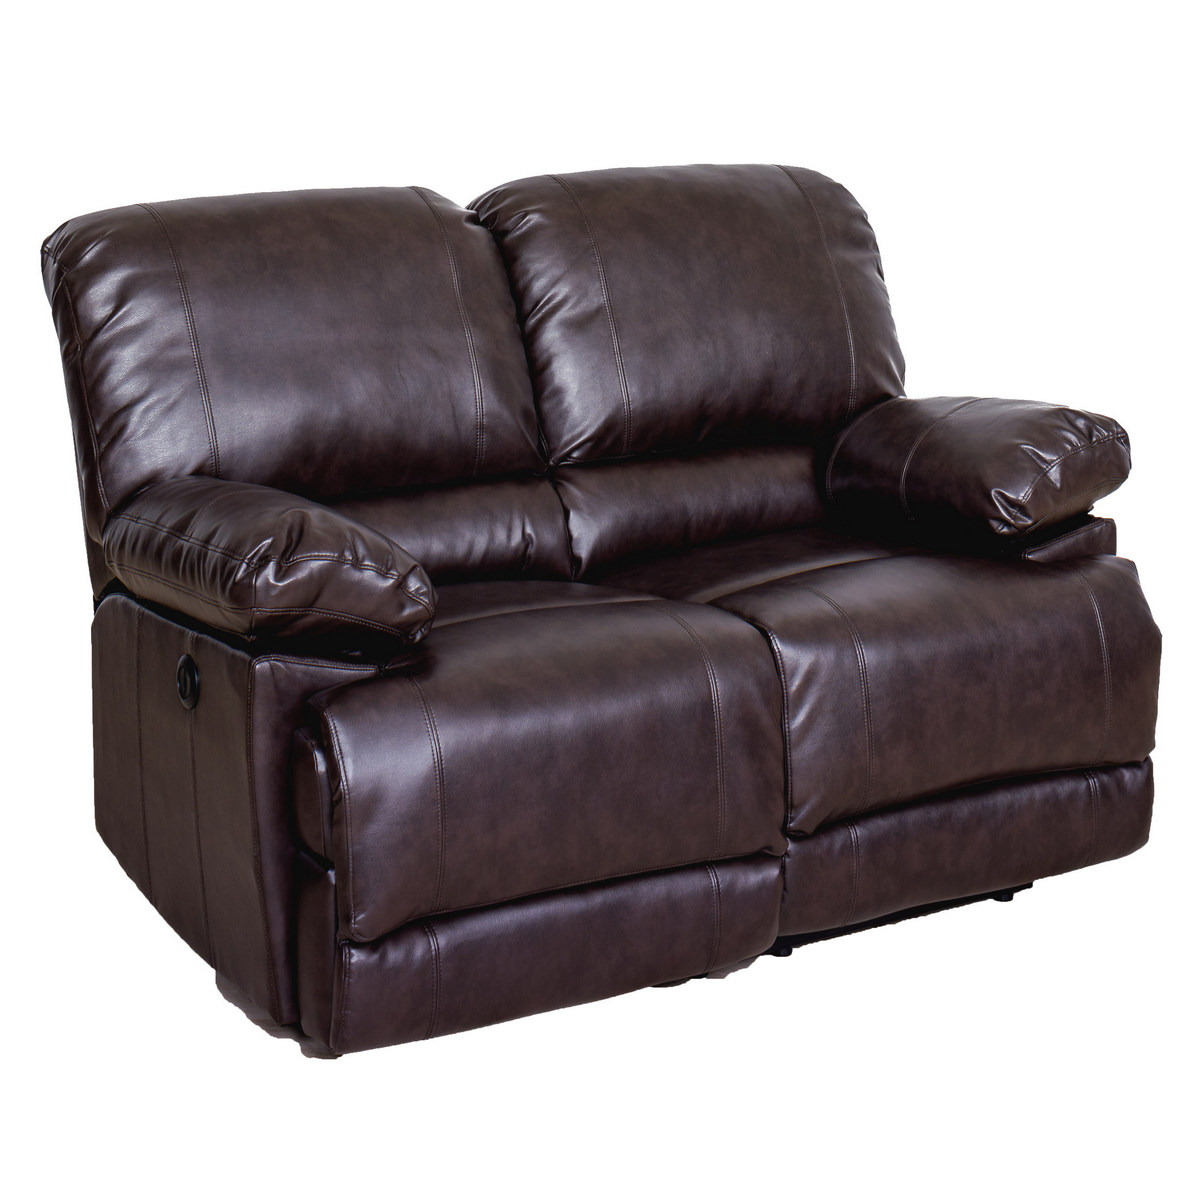 Corliving Lzy-342-l Lea Chocolate Brown Bonded Leather Power Reclining Loveseat W/ Usb Port